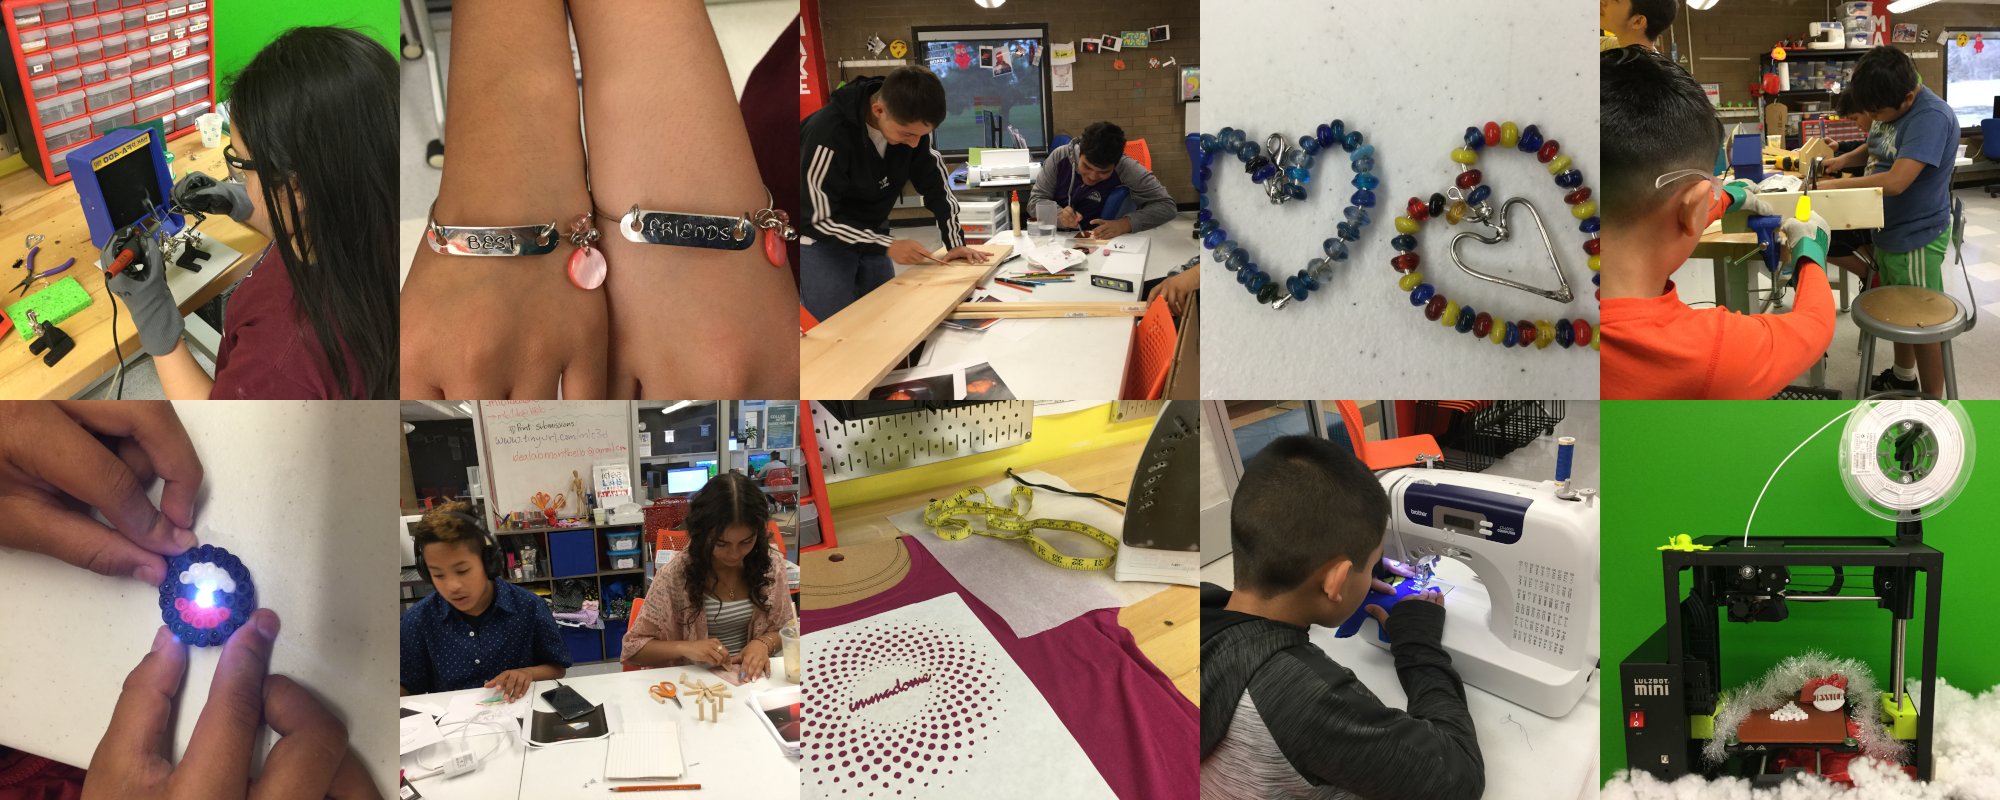 Examples of people working and making in the Montbello ideaLAB.